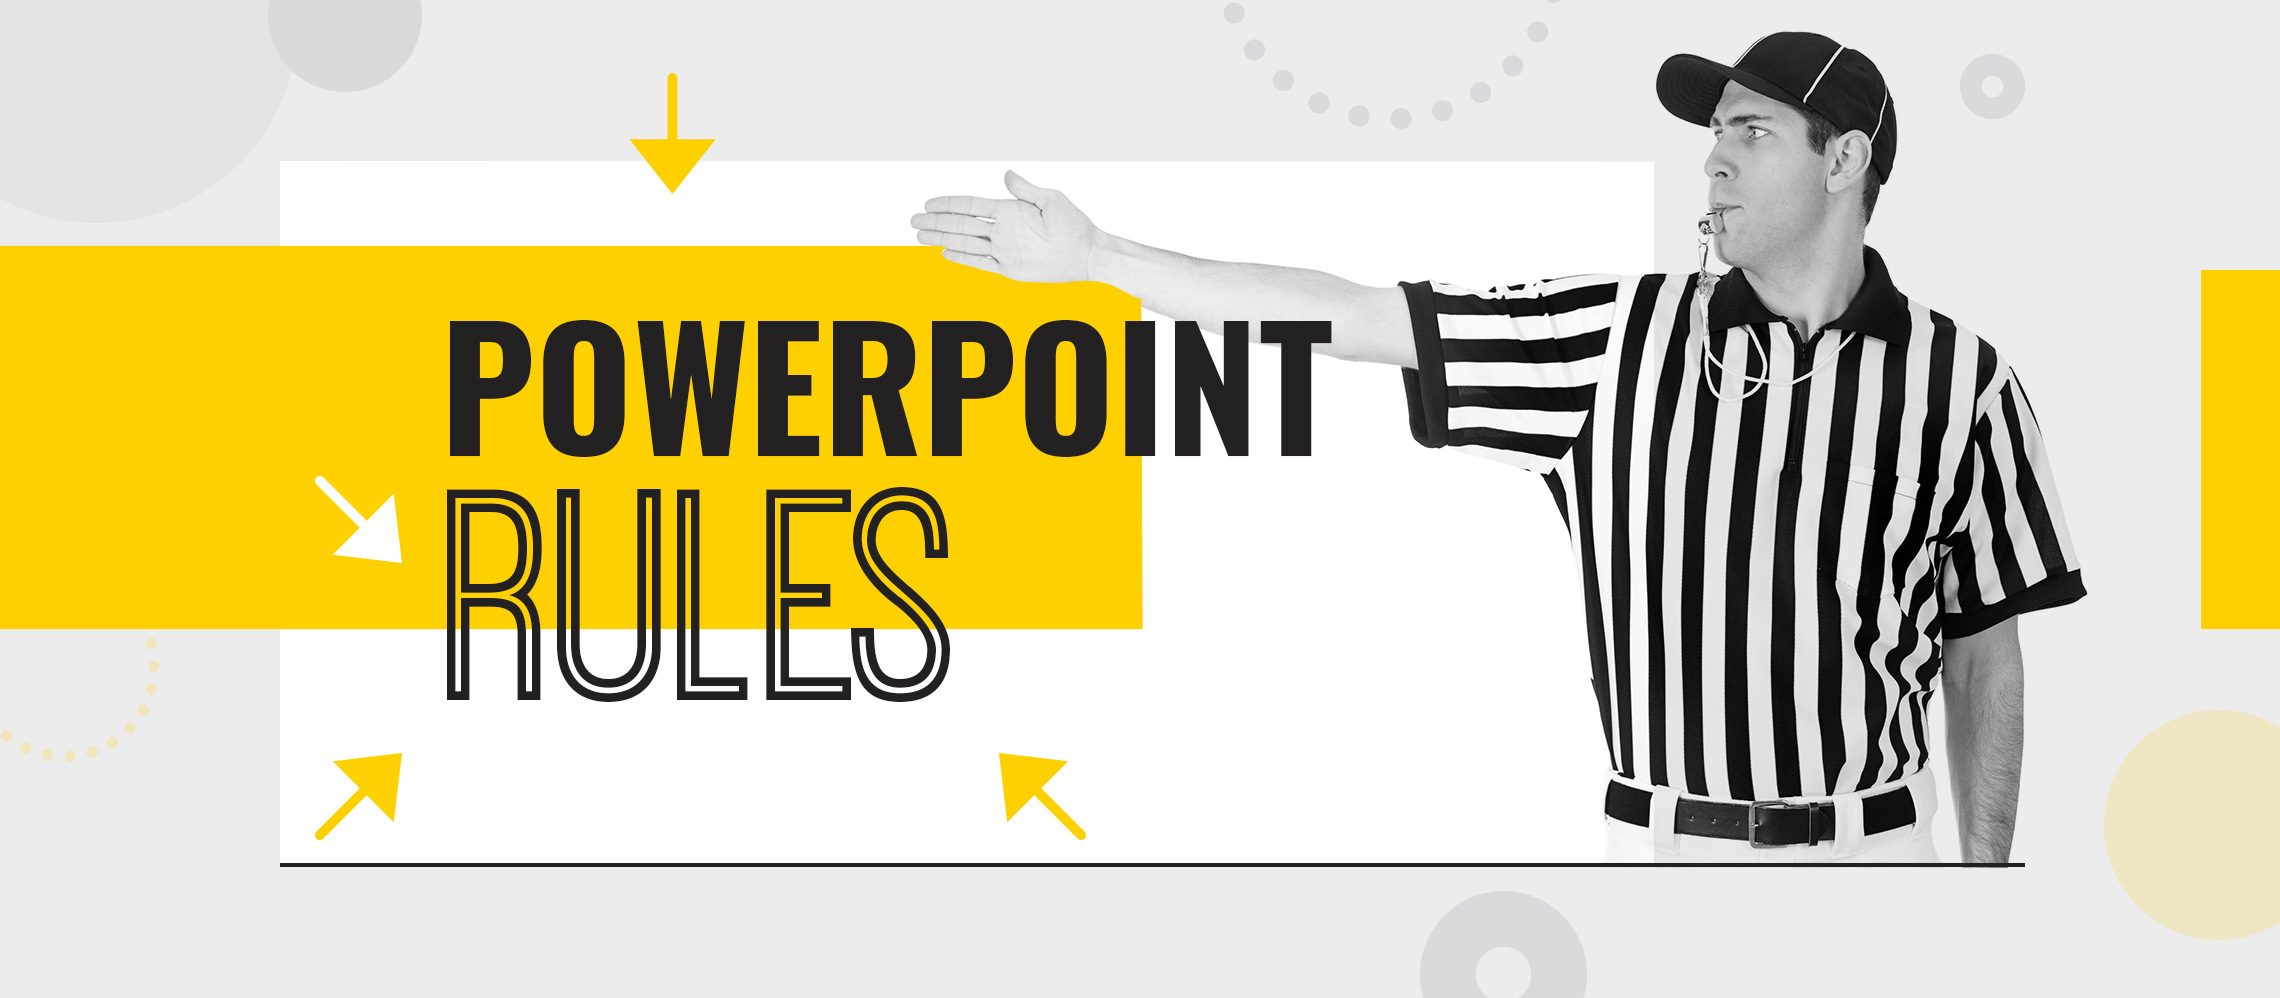 rules for professional powerpoint presentation